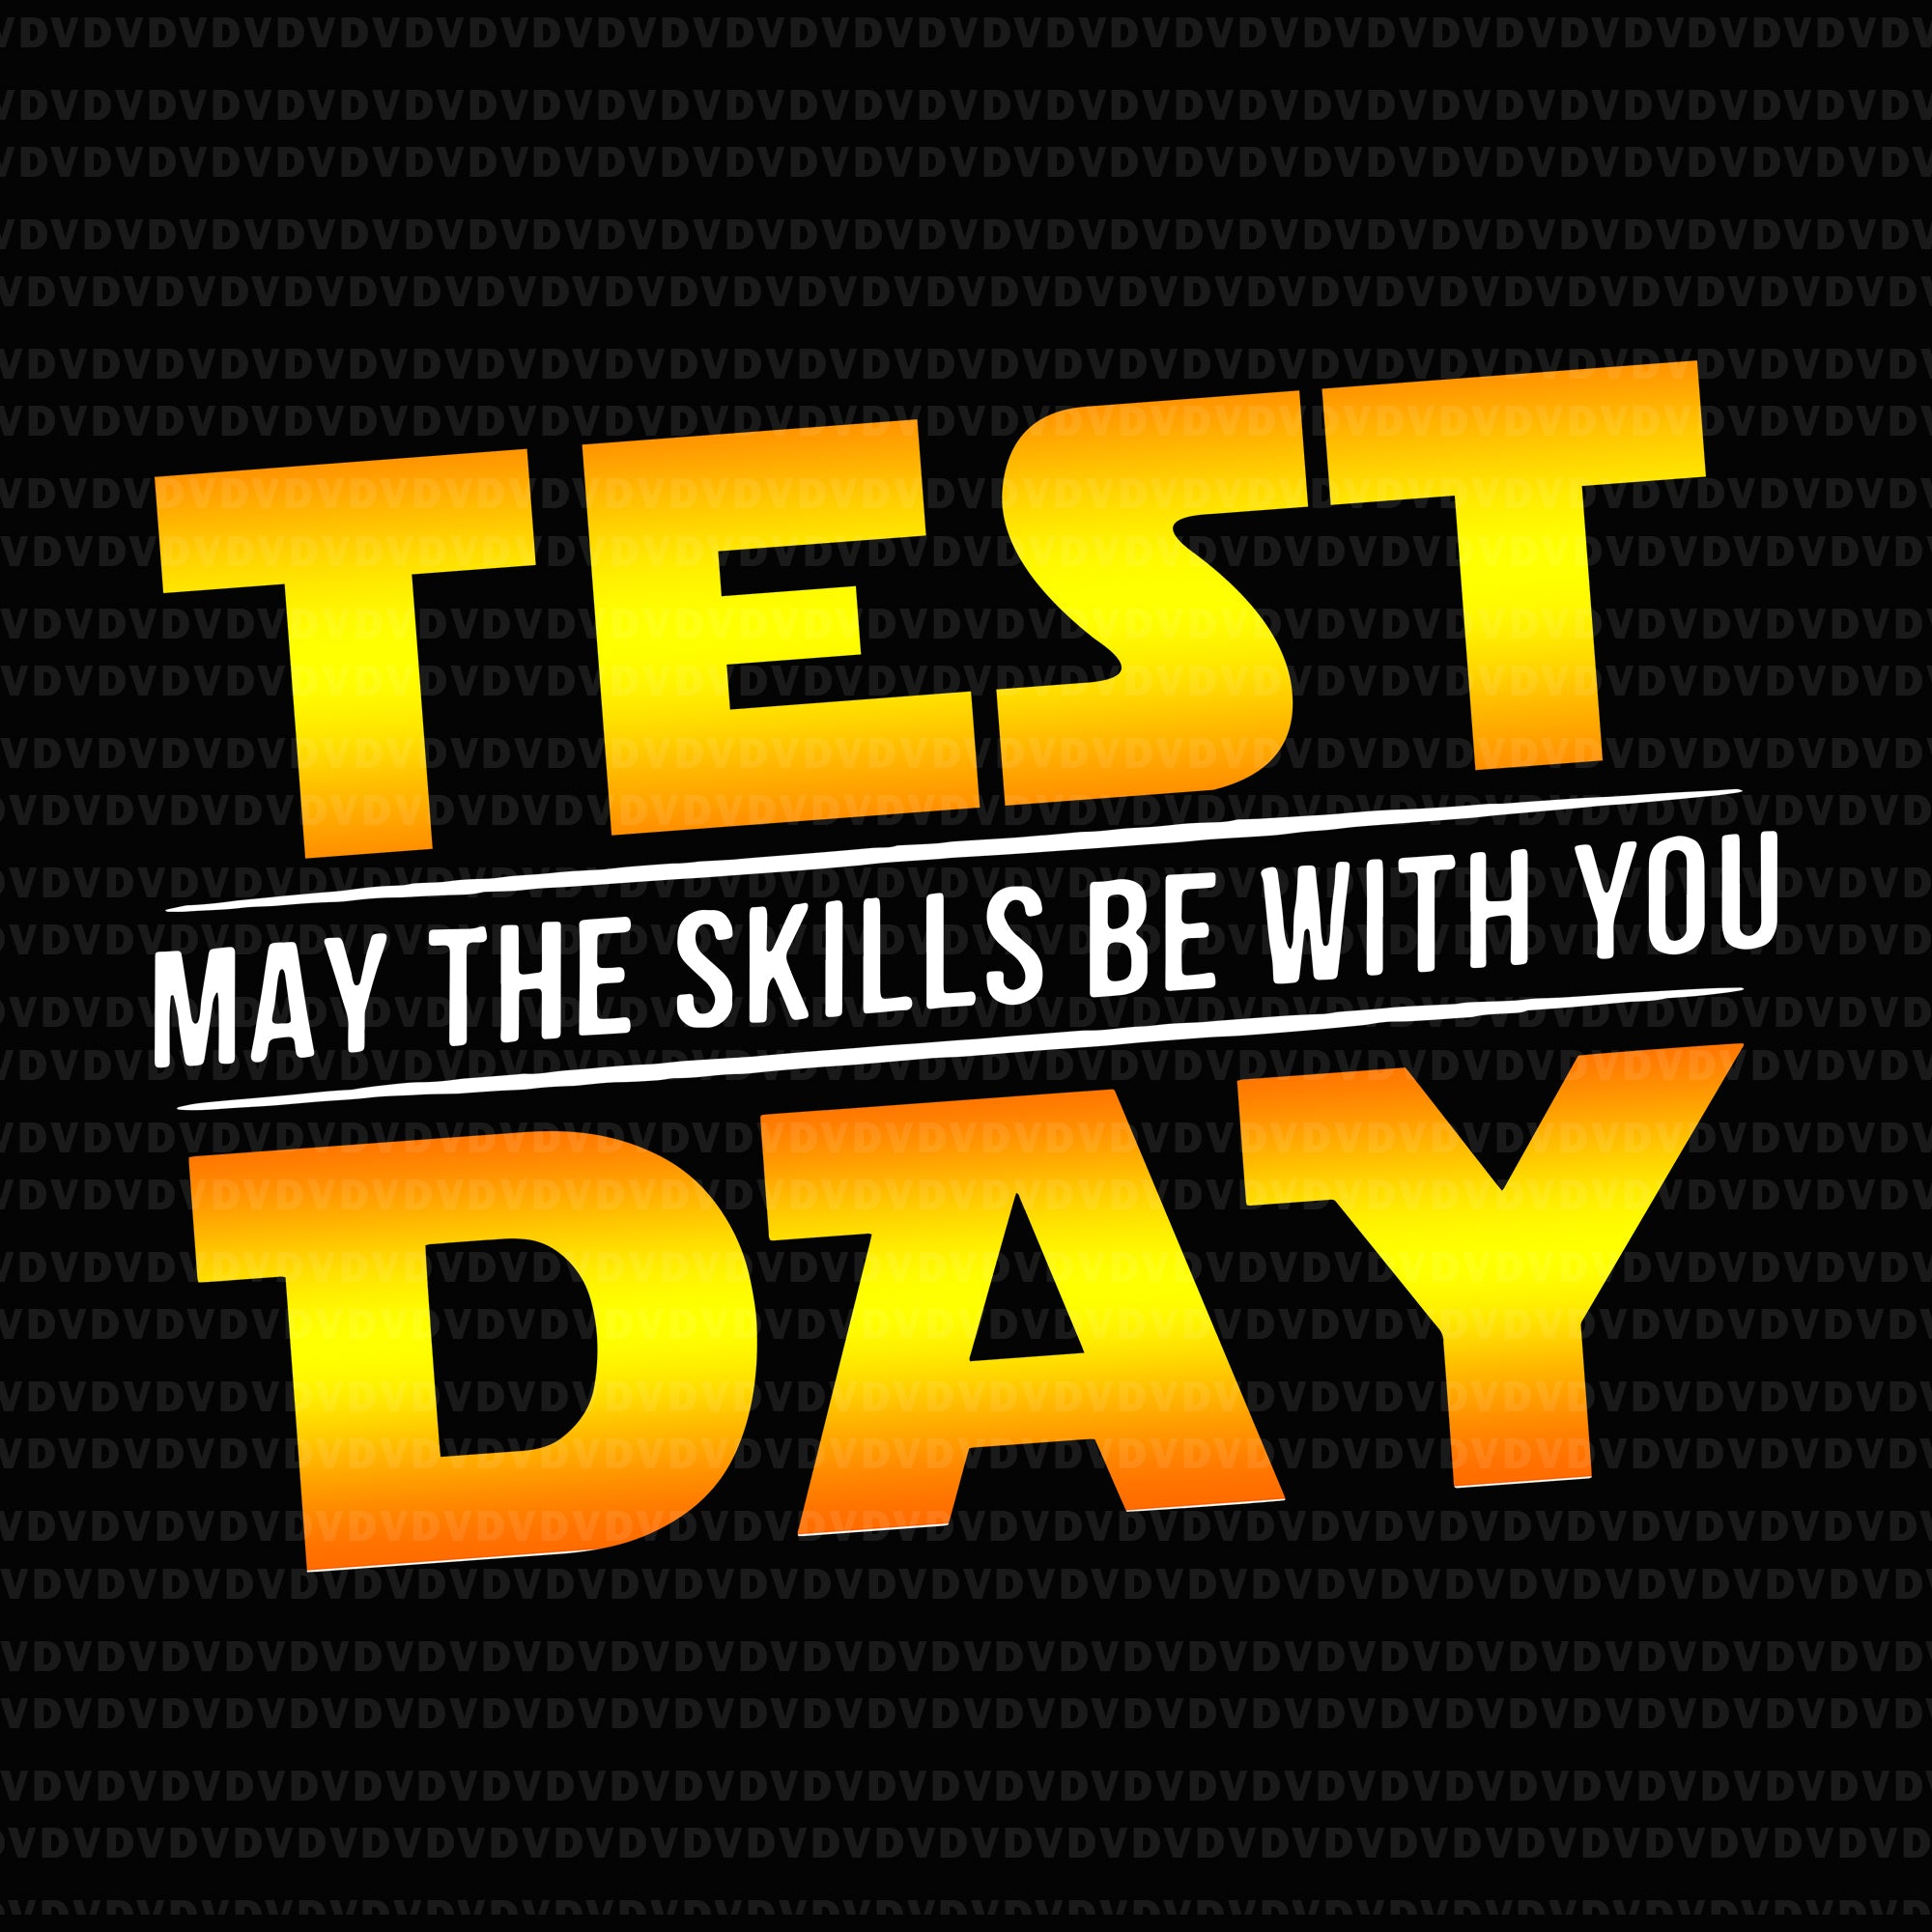 Test day may the skills be with you teacher png, test day may the skills be with you teacher, test day may